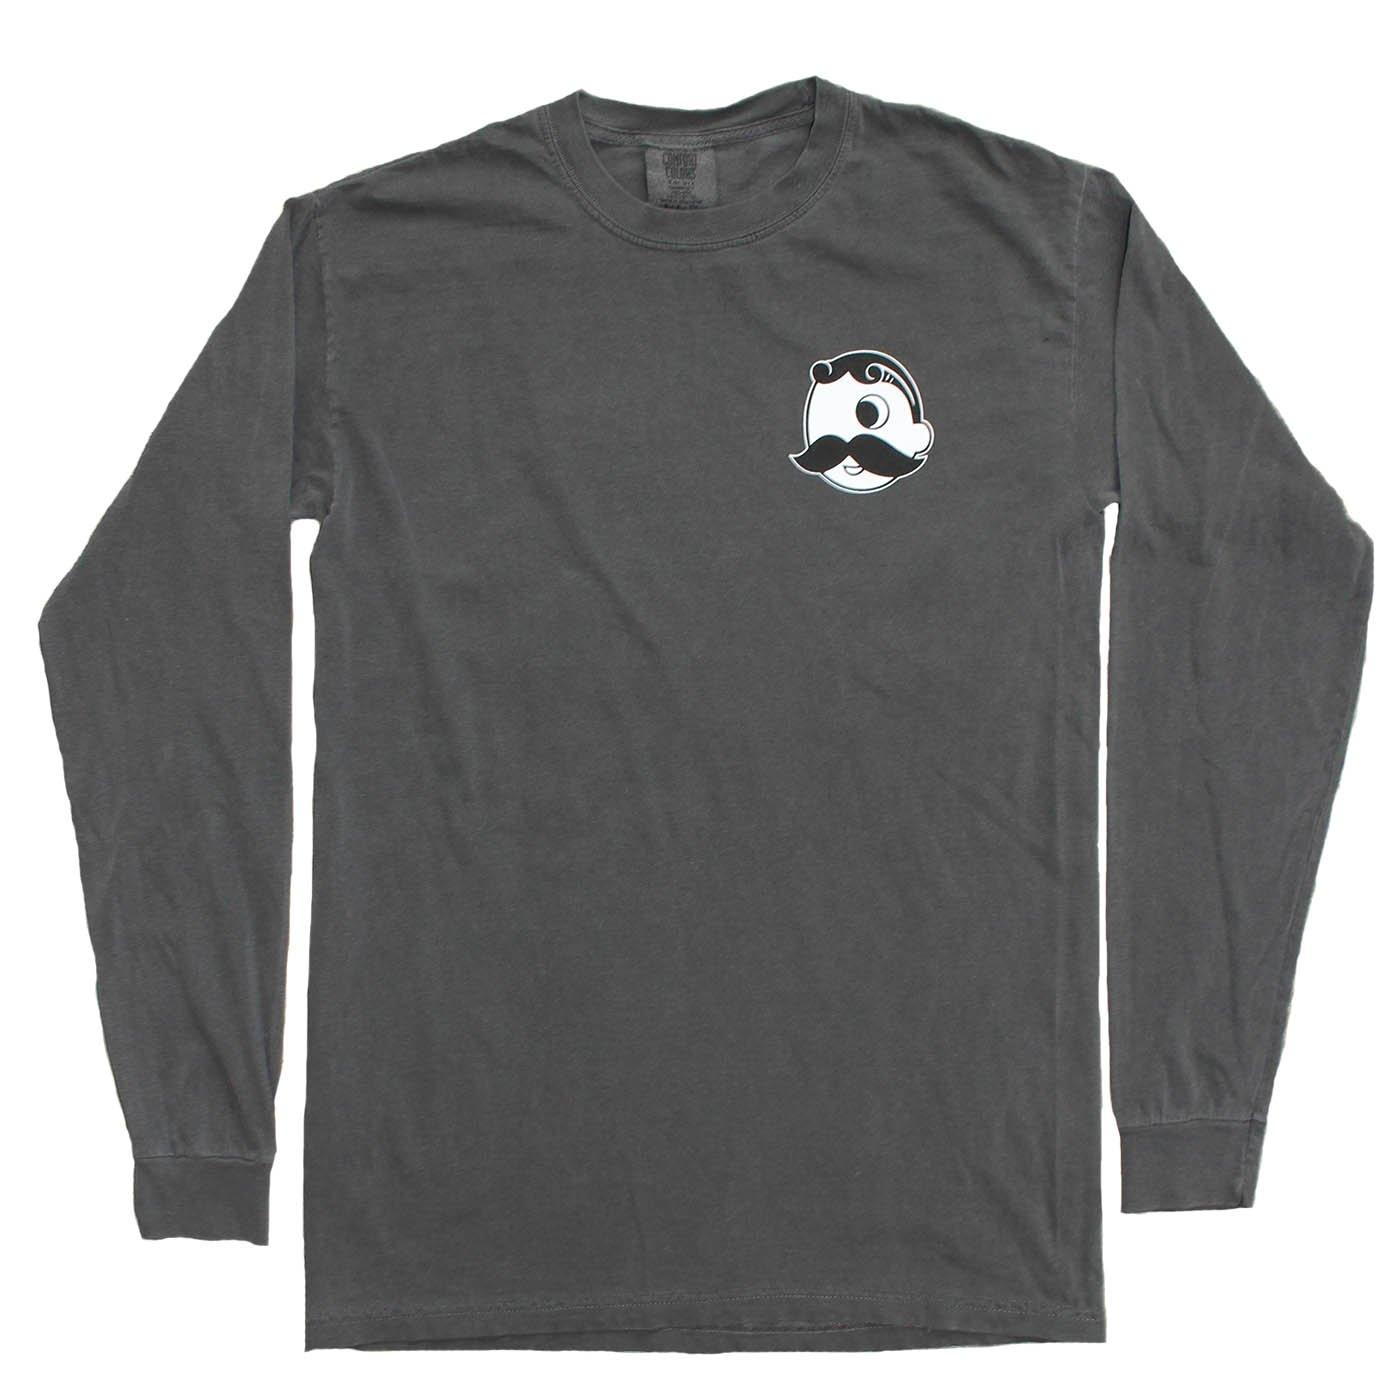 Natty Boh Can Surfboards (Pepper) / Long Sleeve Shirt - Route One Apparel